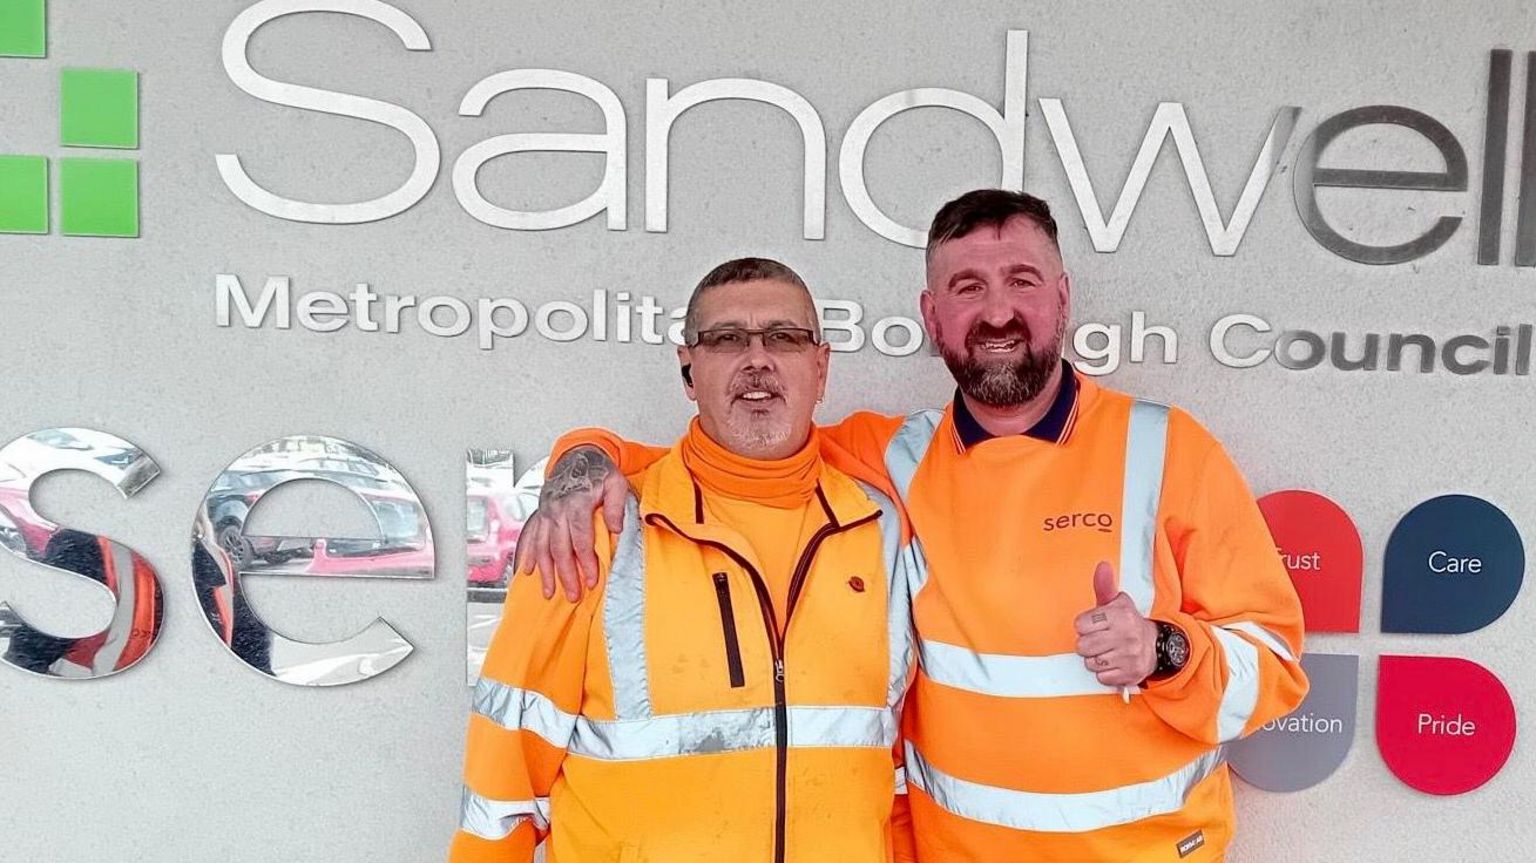 Kevin Marriott (left) and Steve Whitehouse (right) in their work uniforms, in front of a Sandwell Council logo. Mr Whitehouse gives a thumbs up to the camera